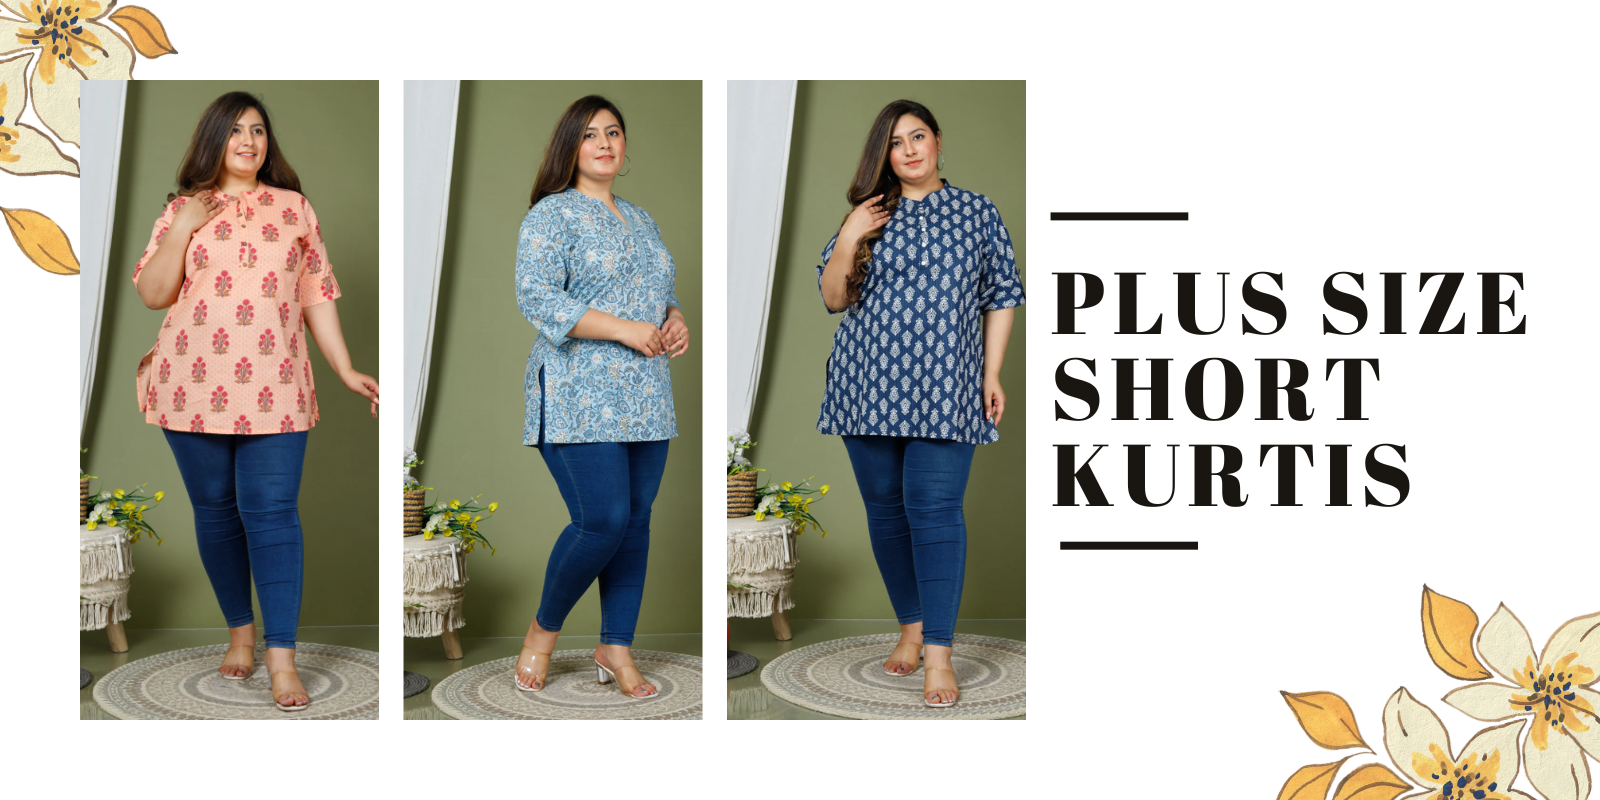 How to Wear Plus Size Short Kurtis in Different Seasons?